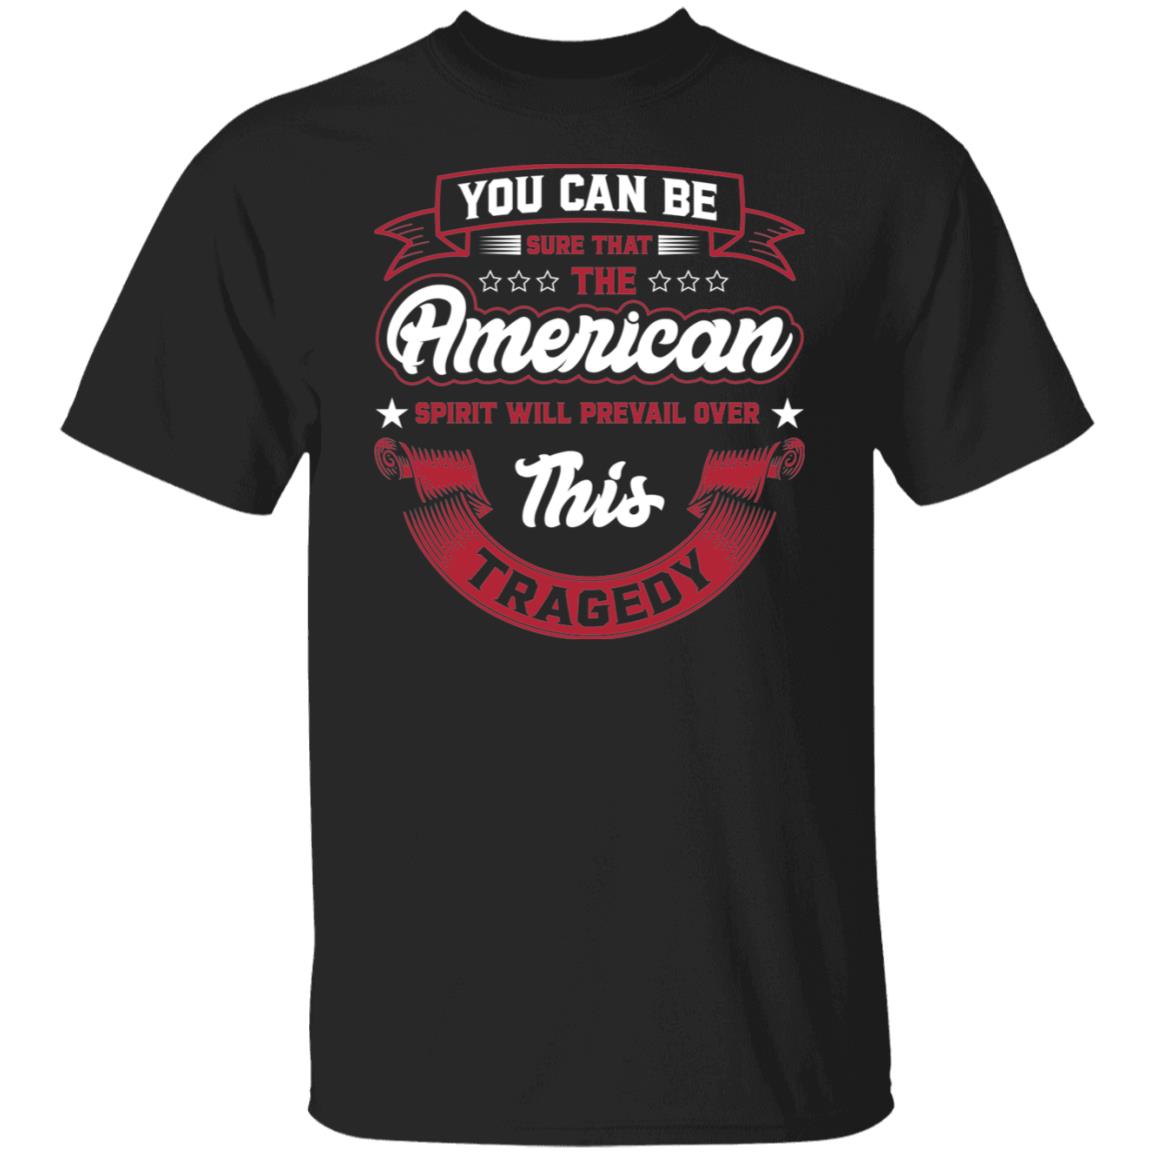 You Can Be Sure That The American Spirit Will Prevail Over This Tragedy Tshirt